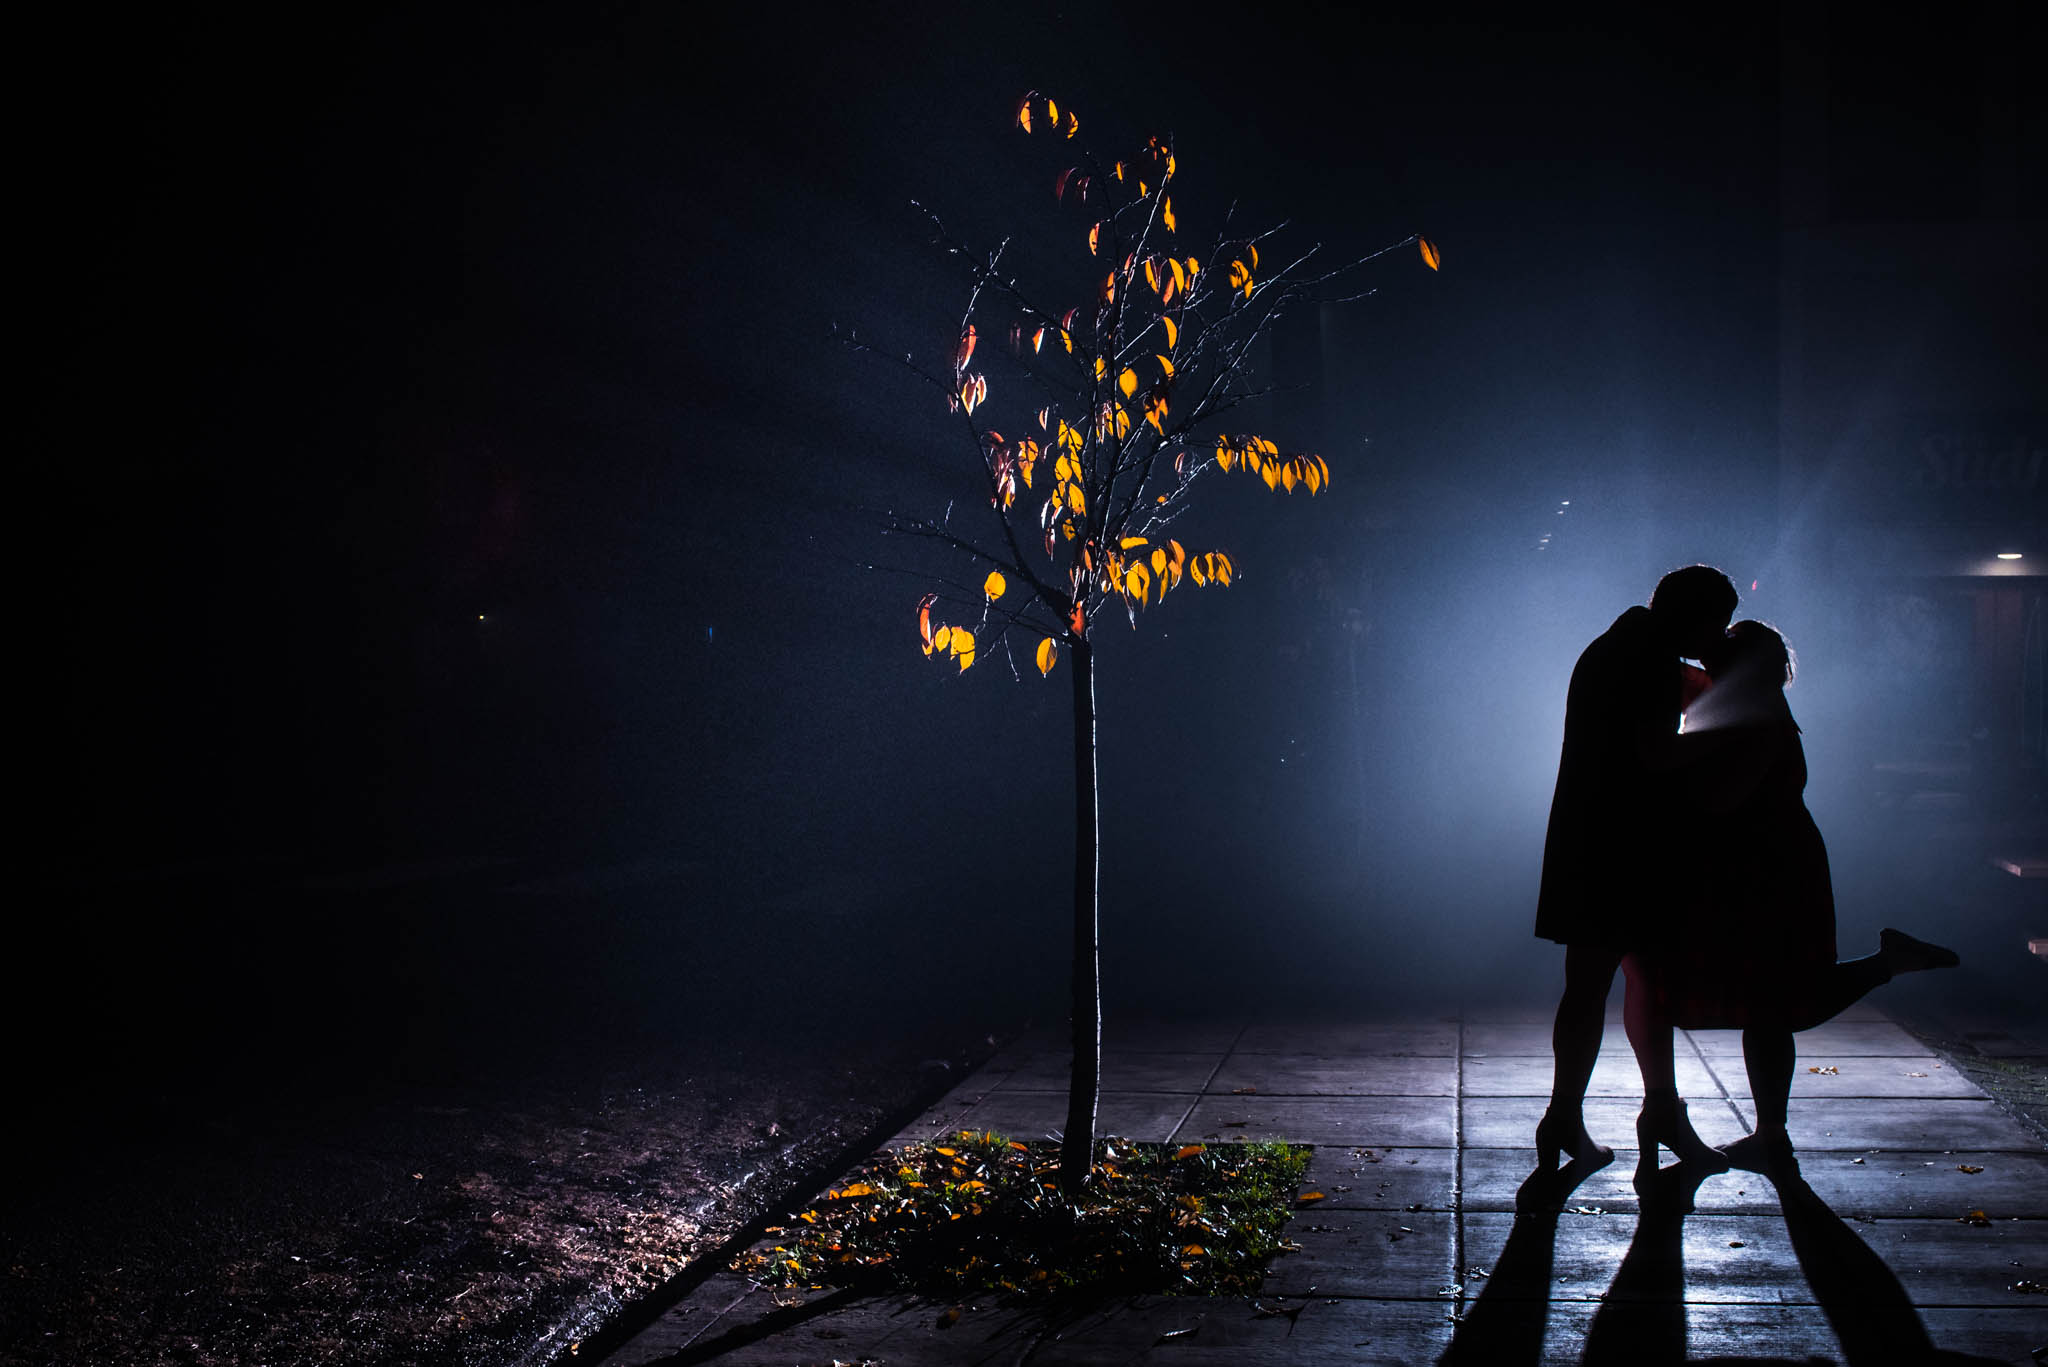 Silhouette photograph of wedding couple on misty street